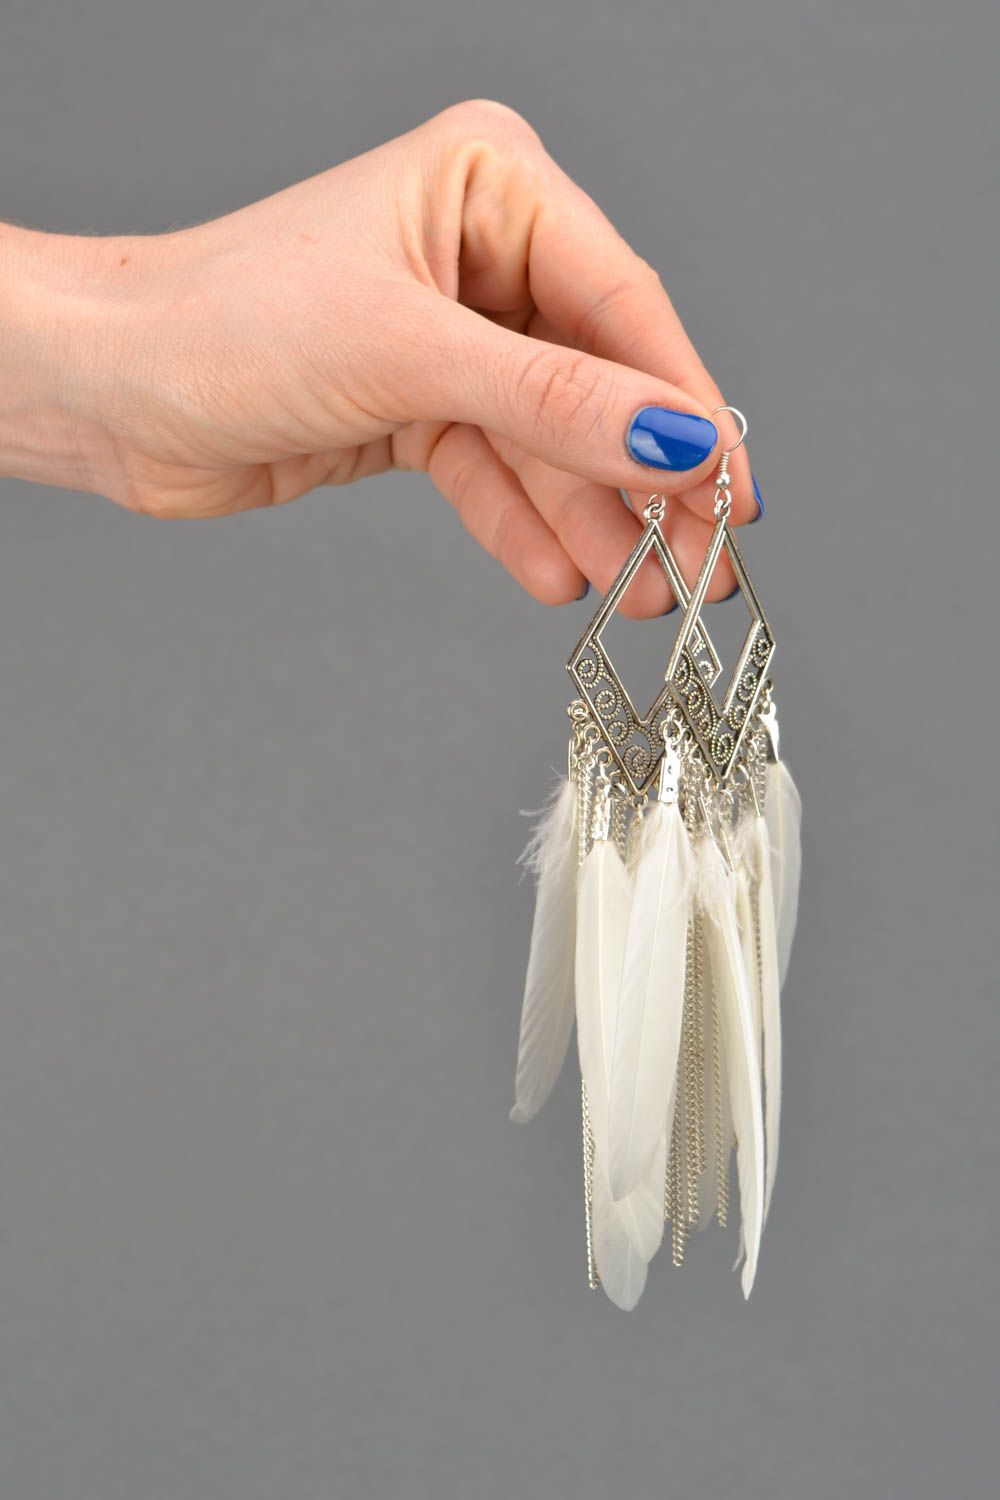 Homemade earrings with feathers photo 2